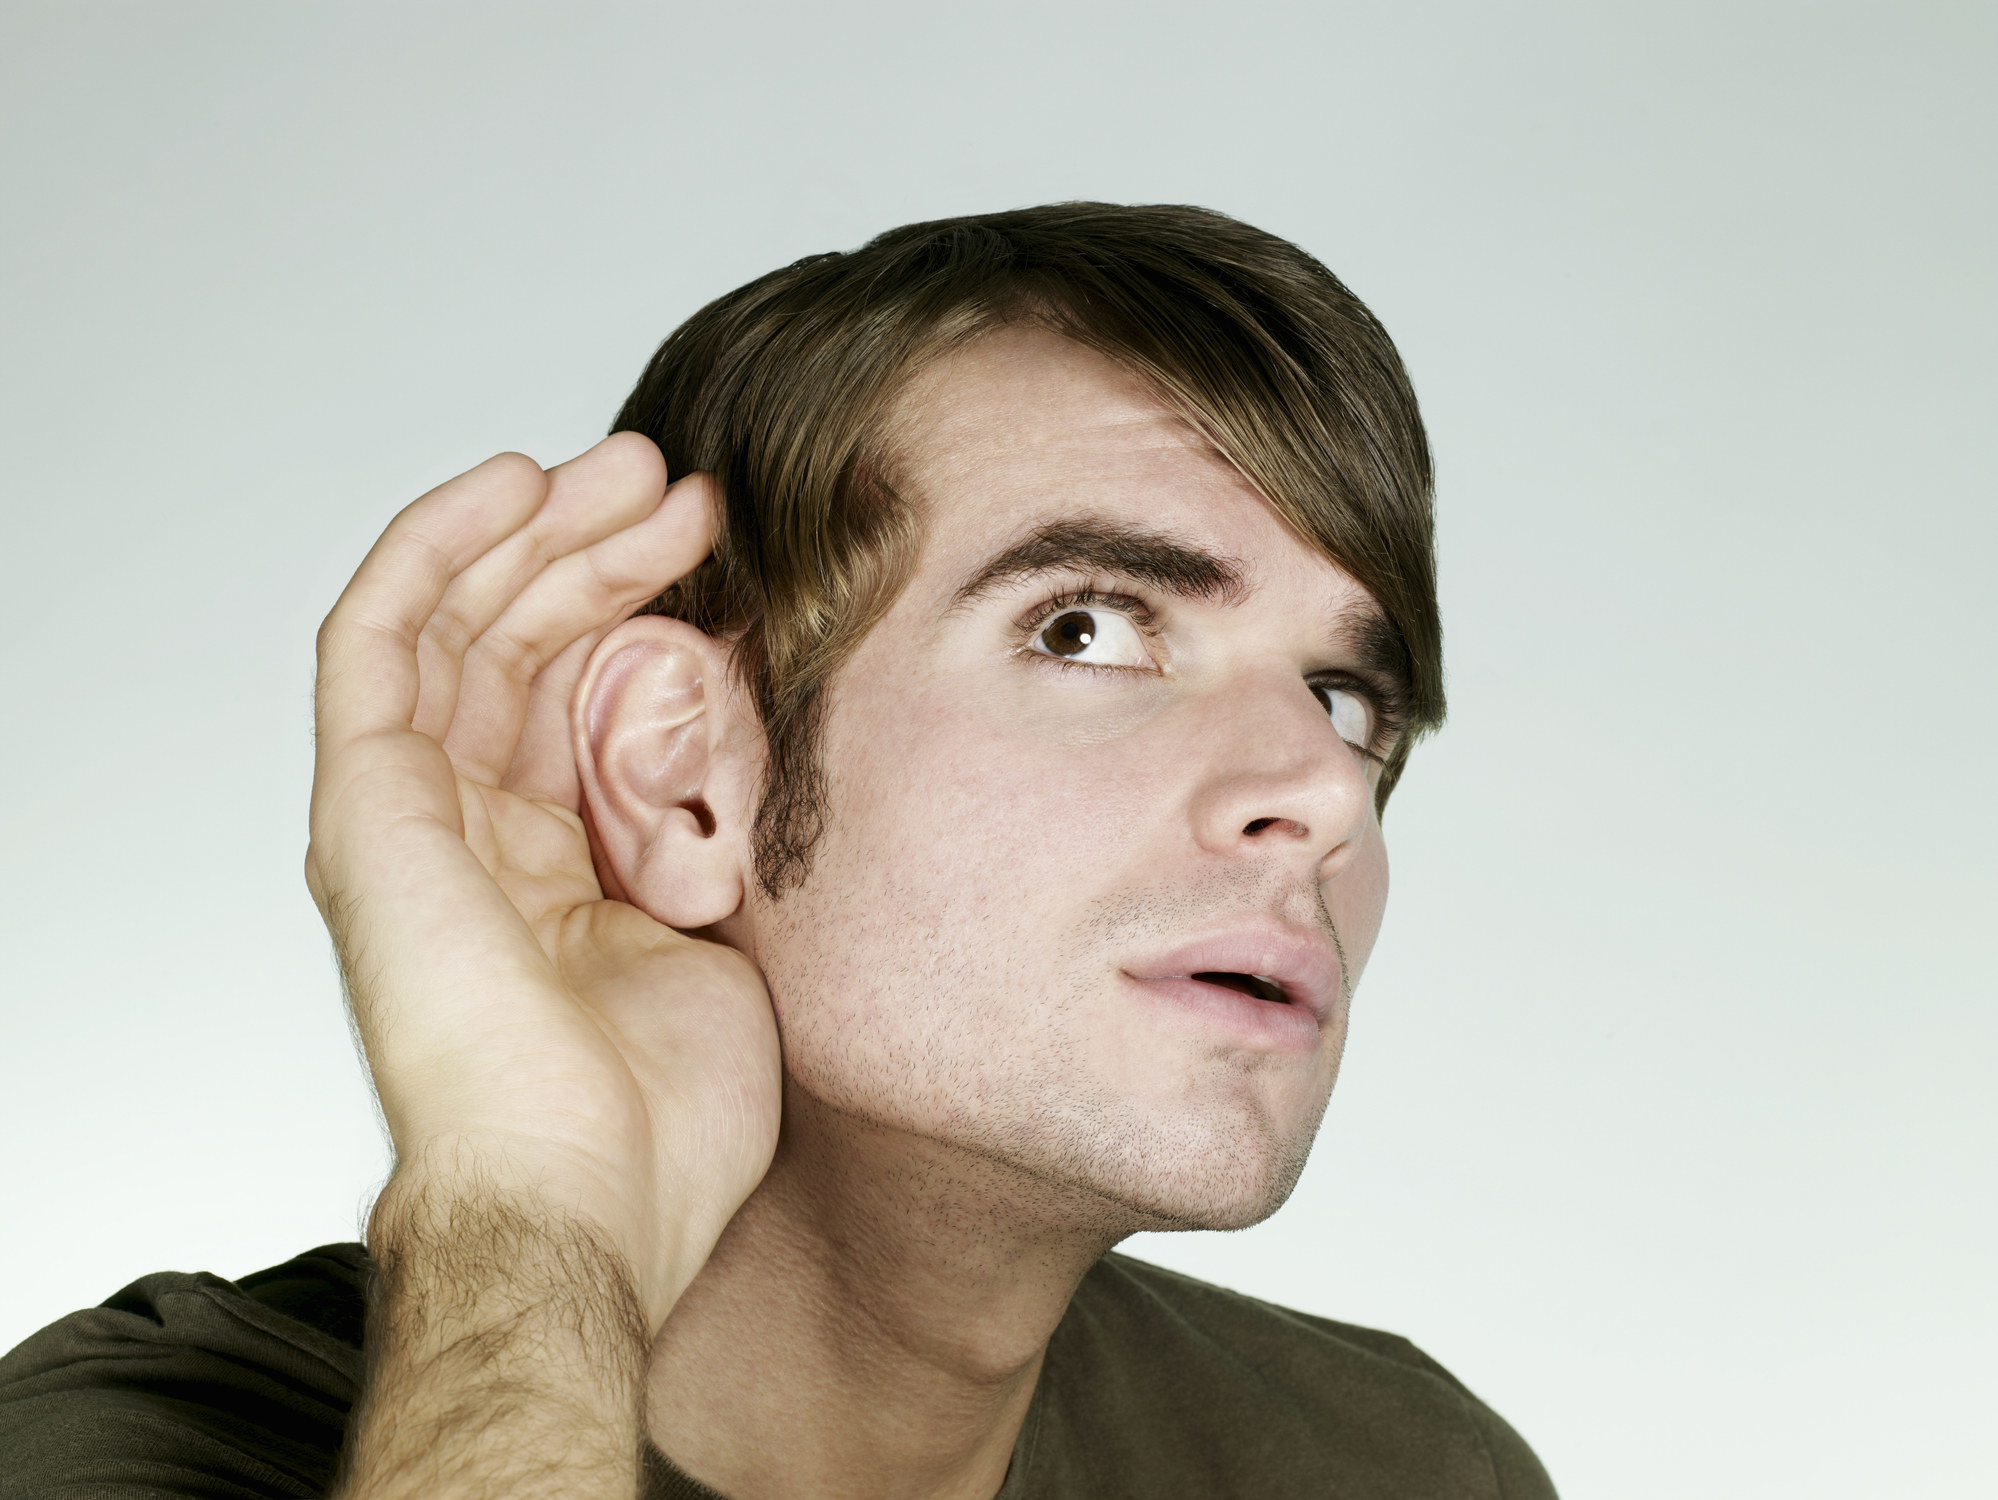 a man leaning in to hear better with his hand and ear enlarged for effect